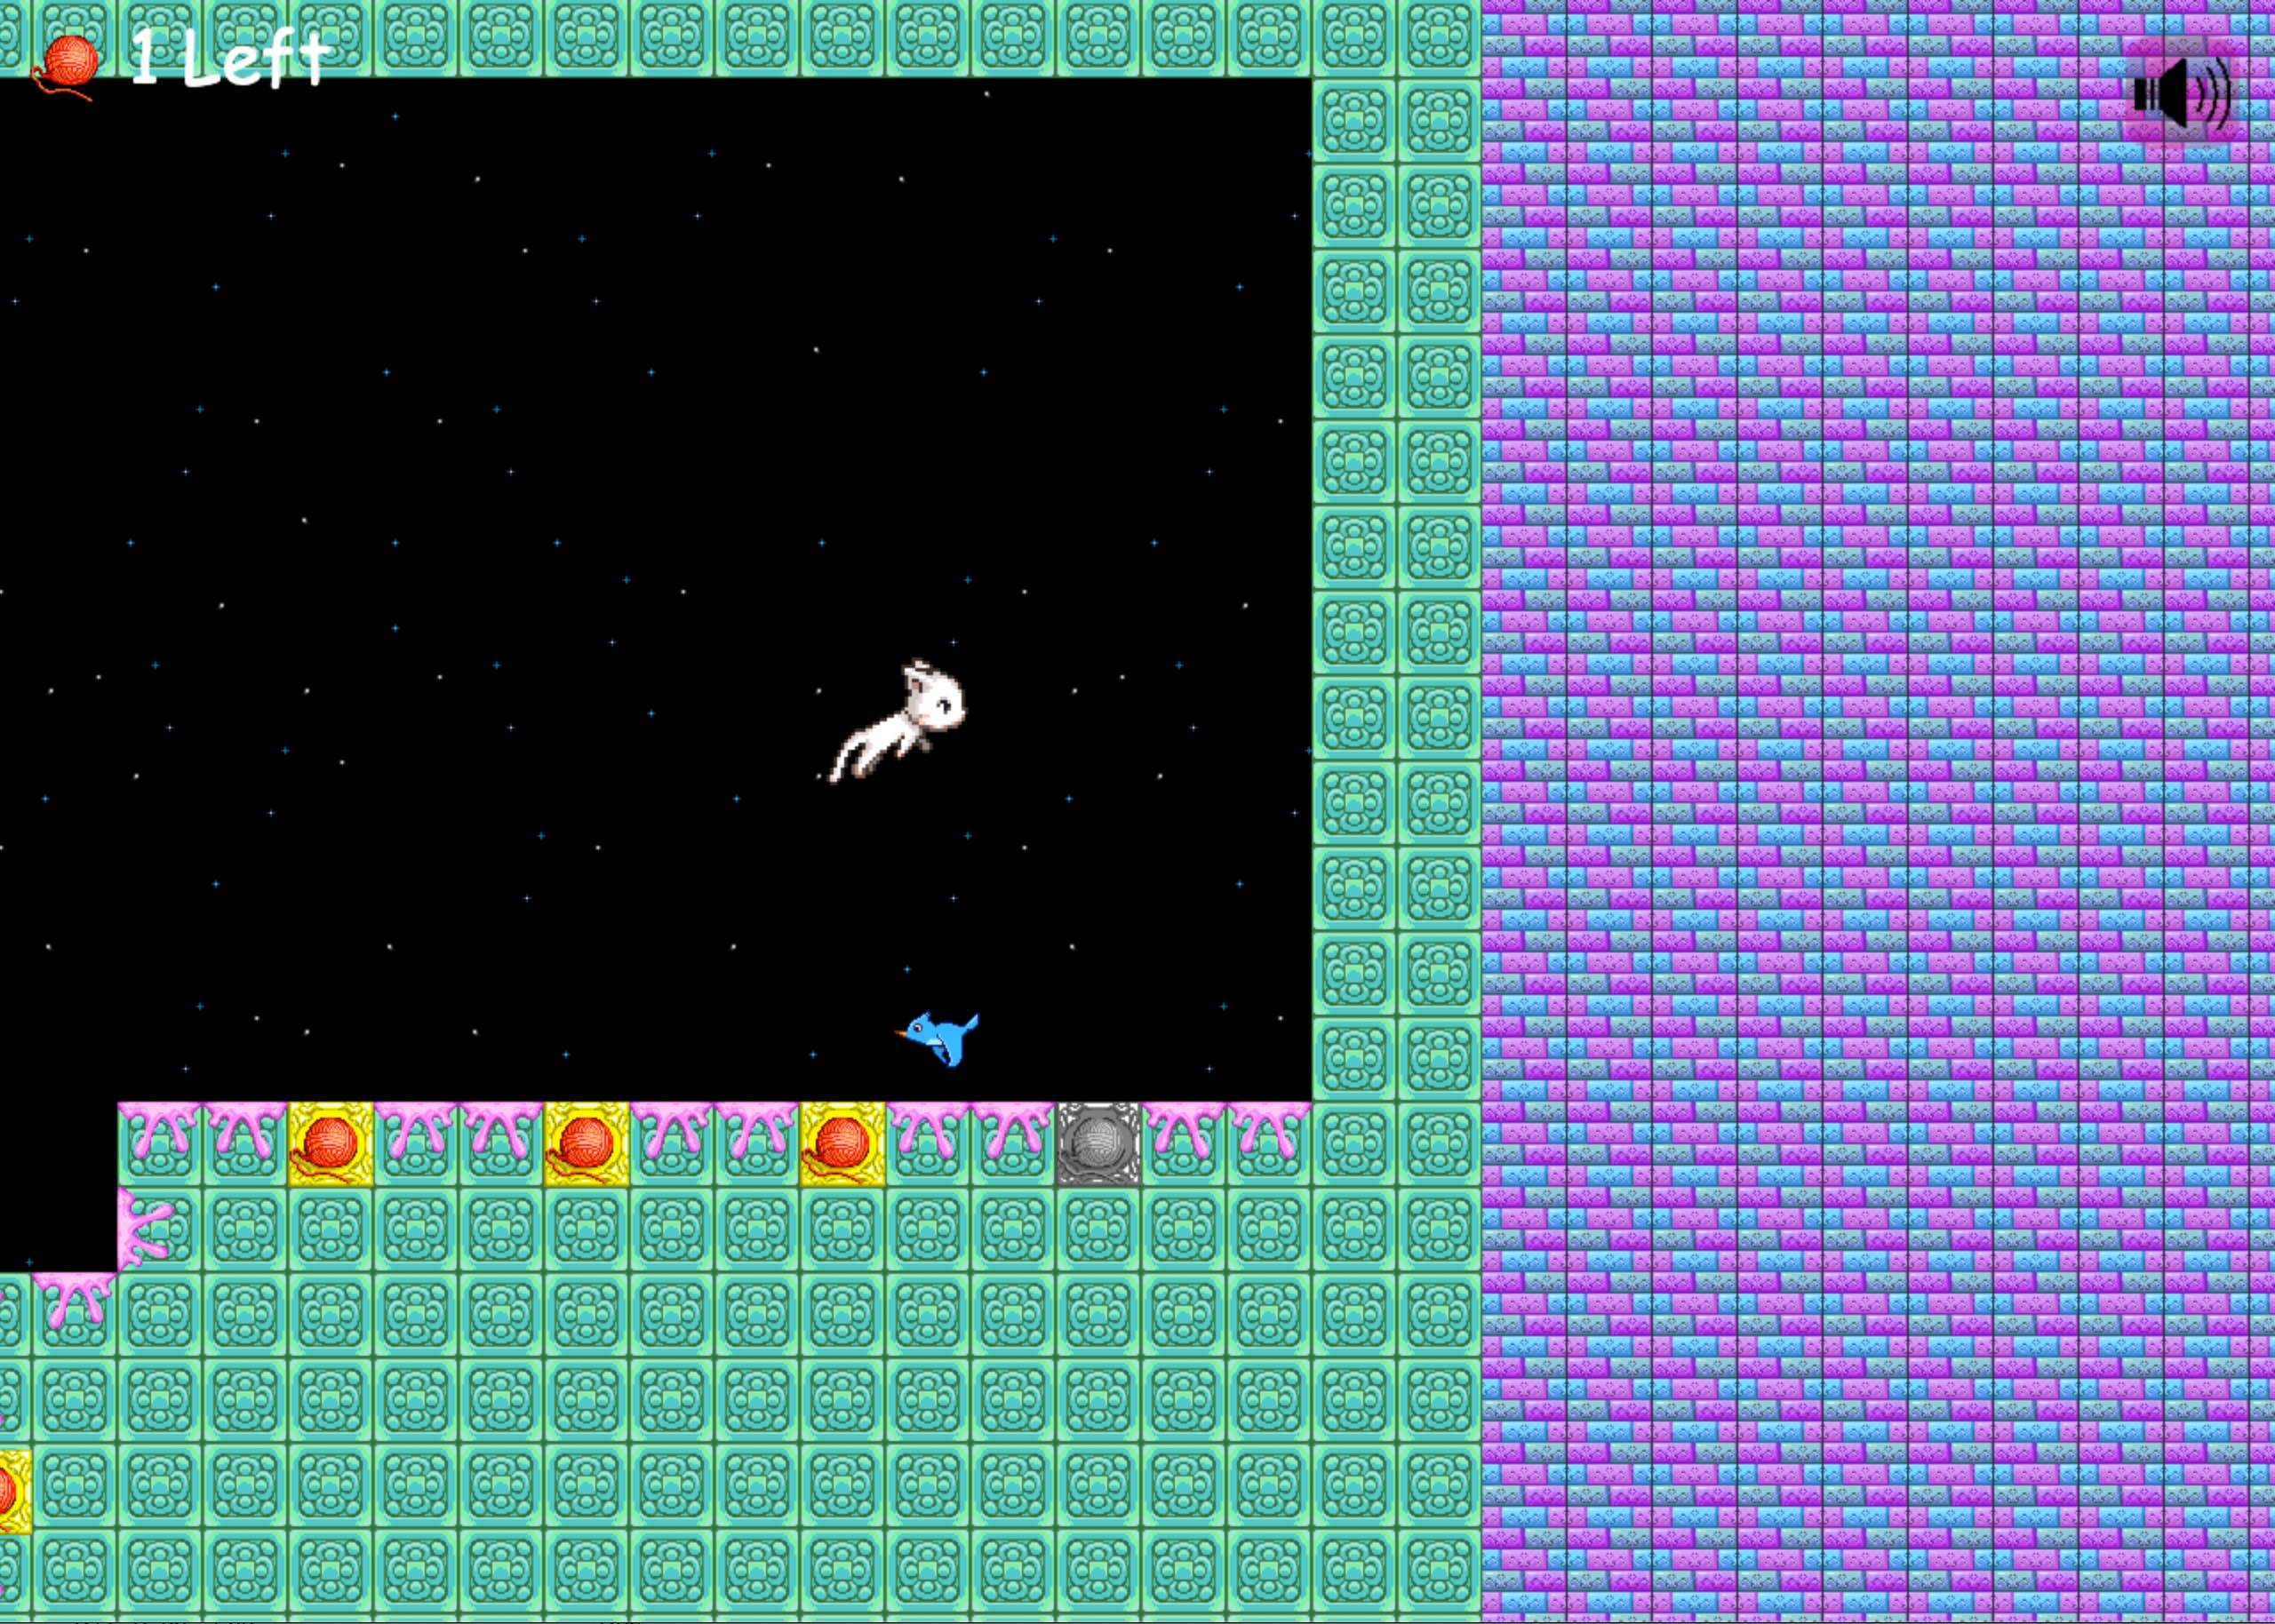 This is a screenshot from Poetry Cat. The player is jumping over a blue bird and about to land on the final yarn ball.